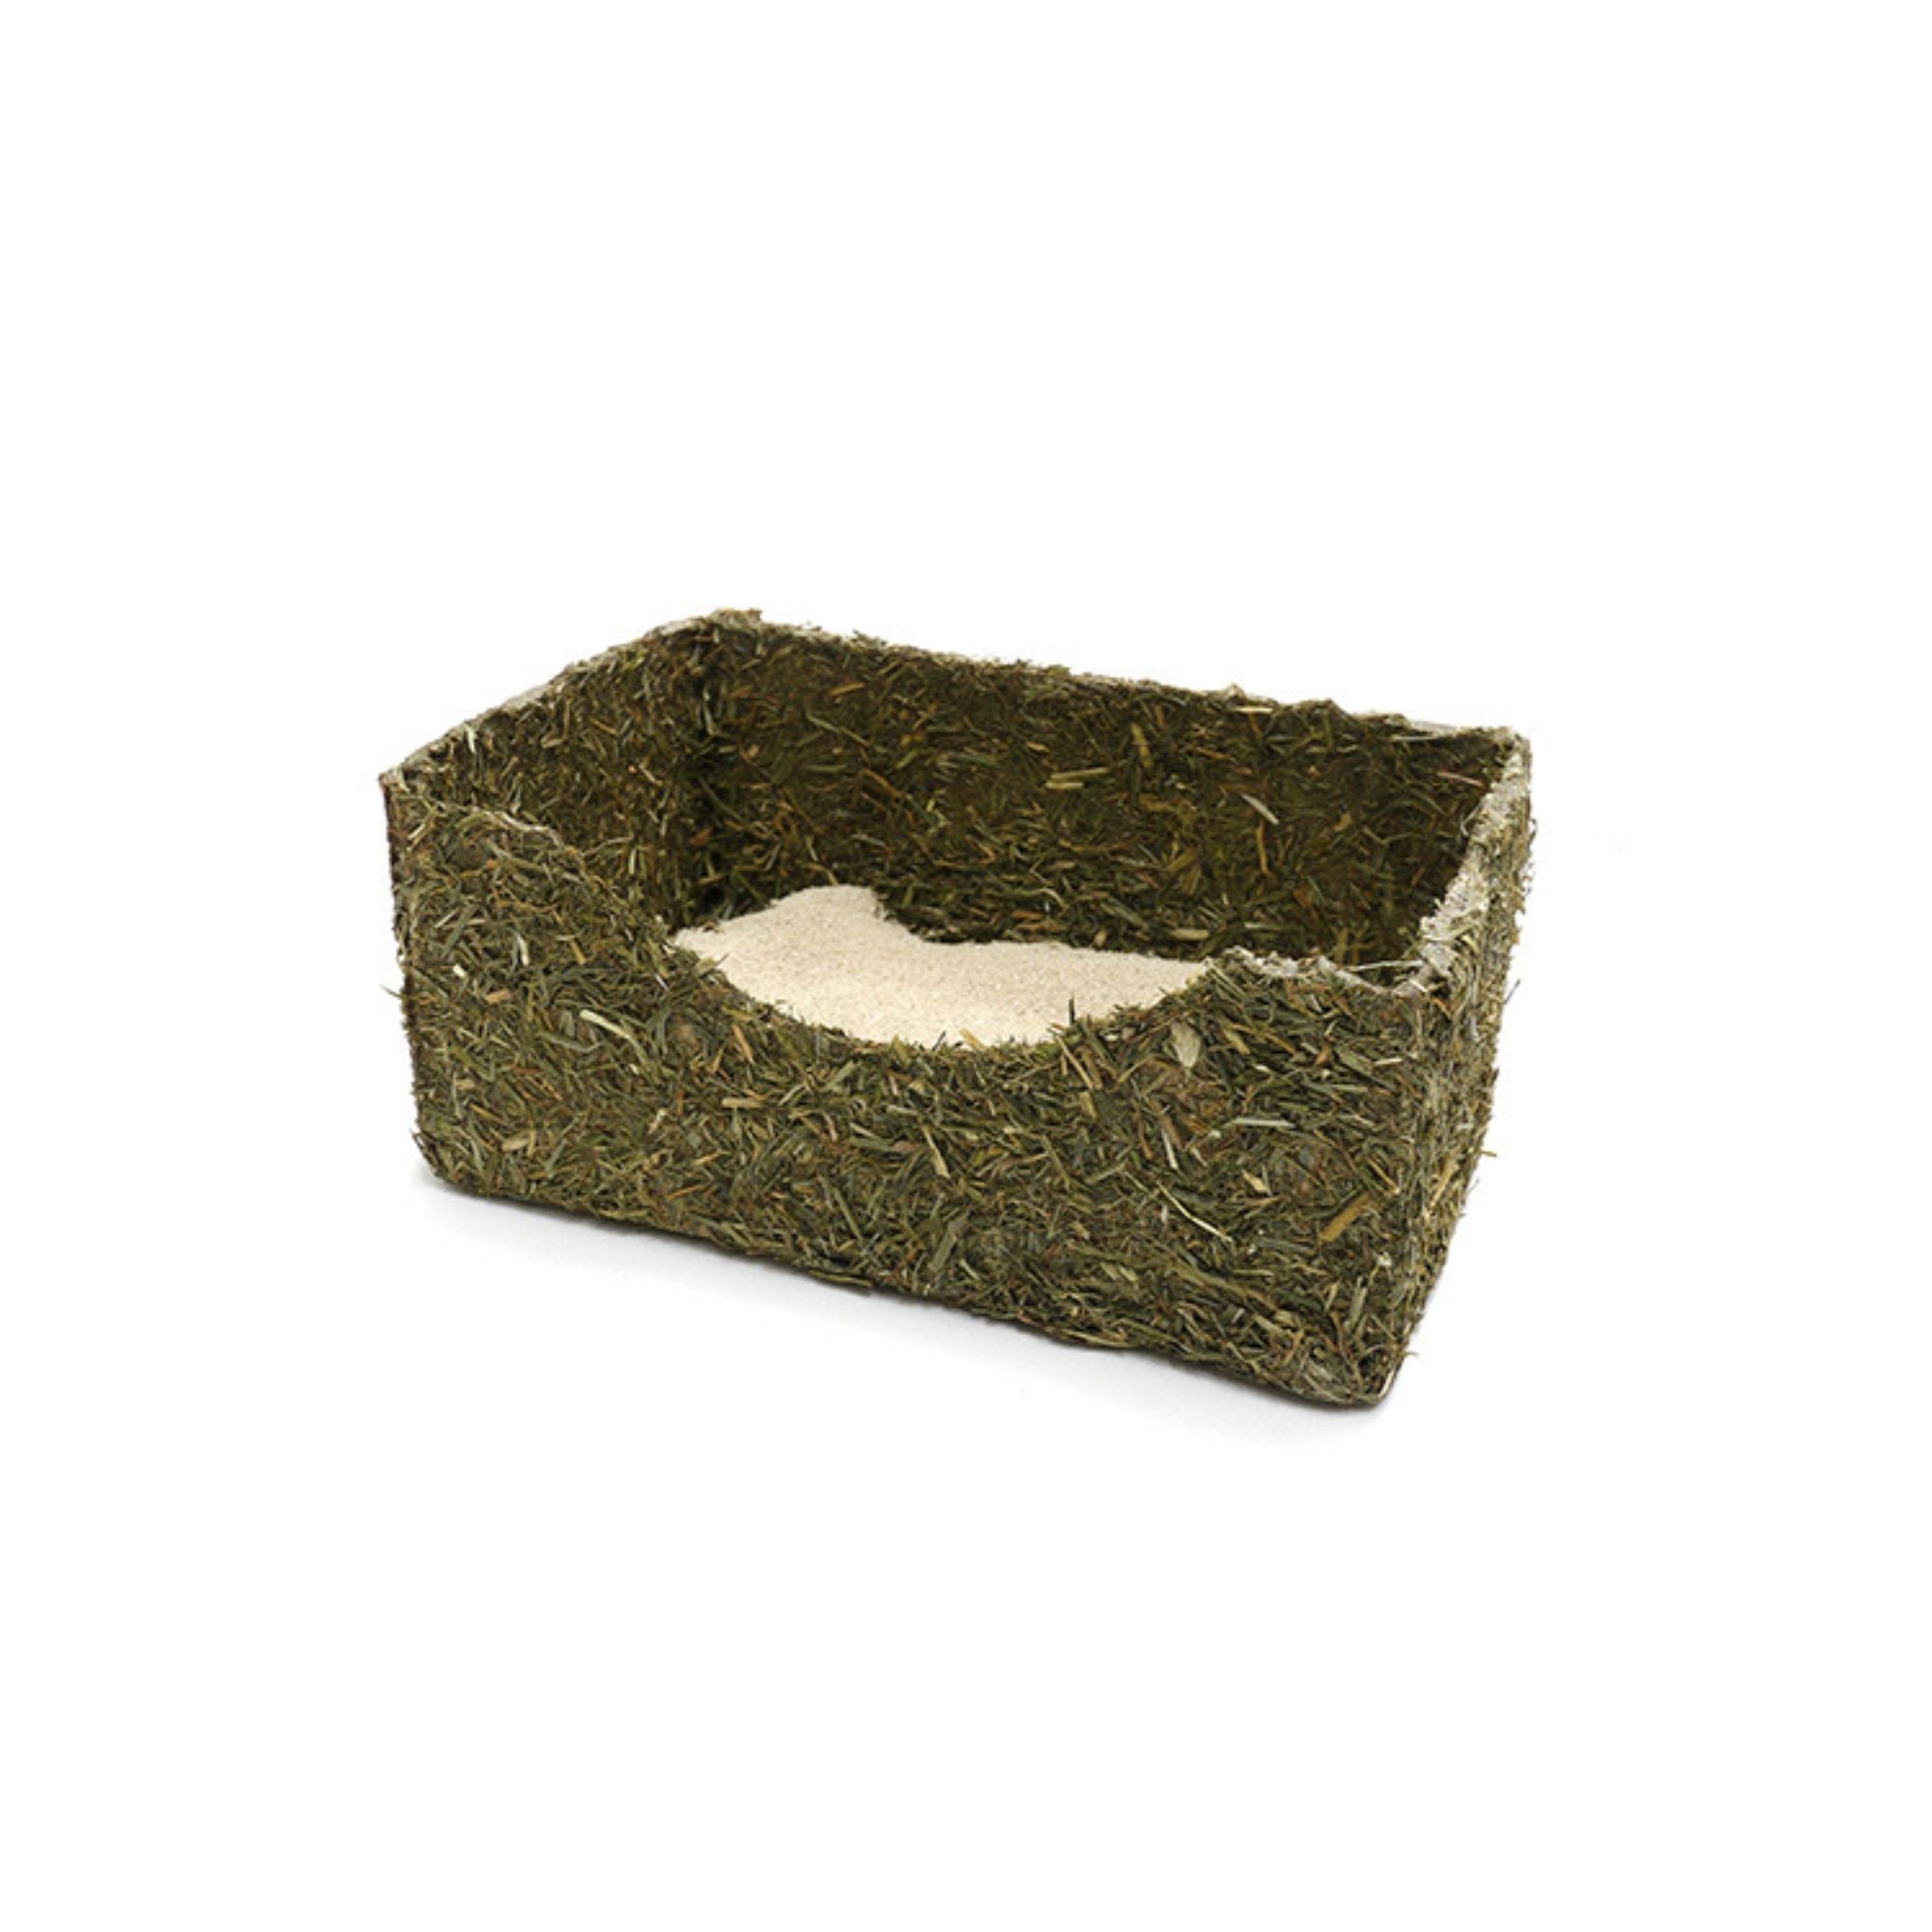 Rollin Rodent Sand Bath - Outlet Store